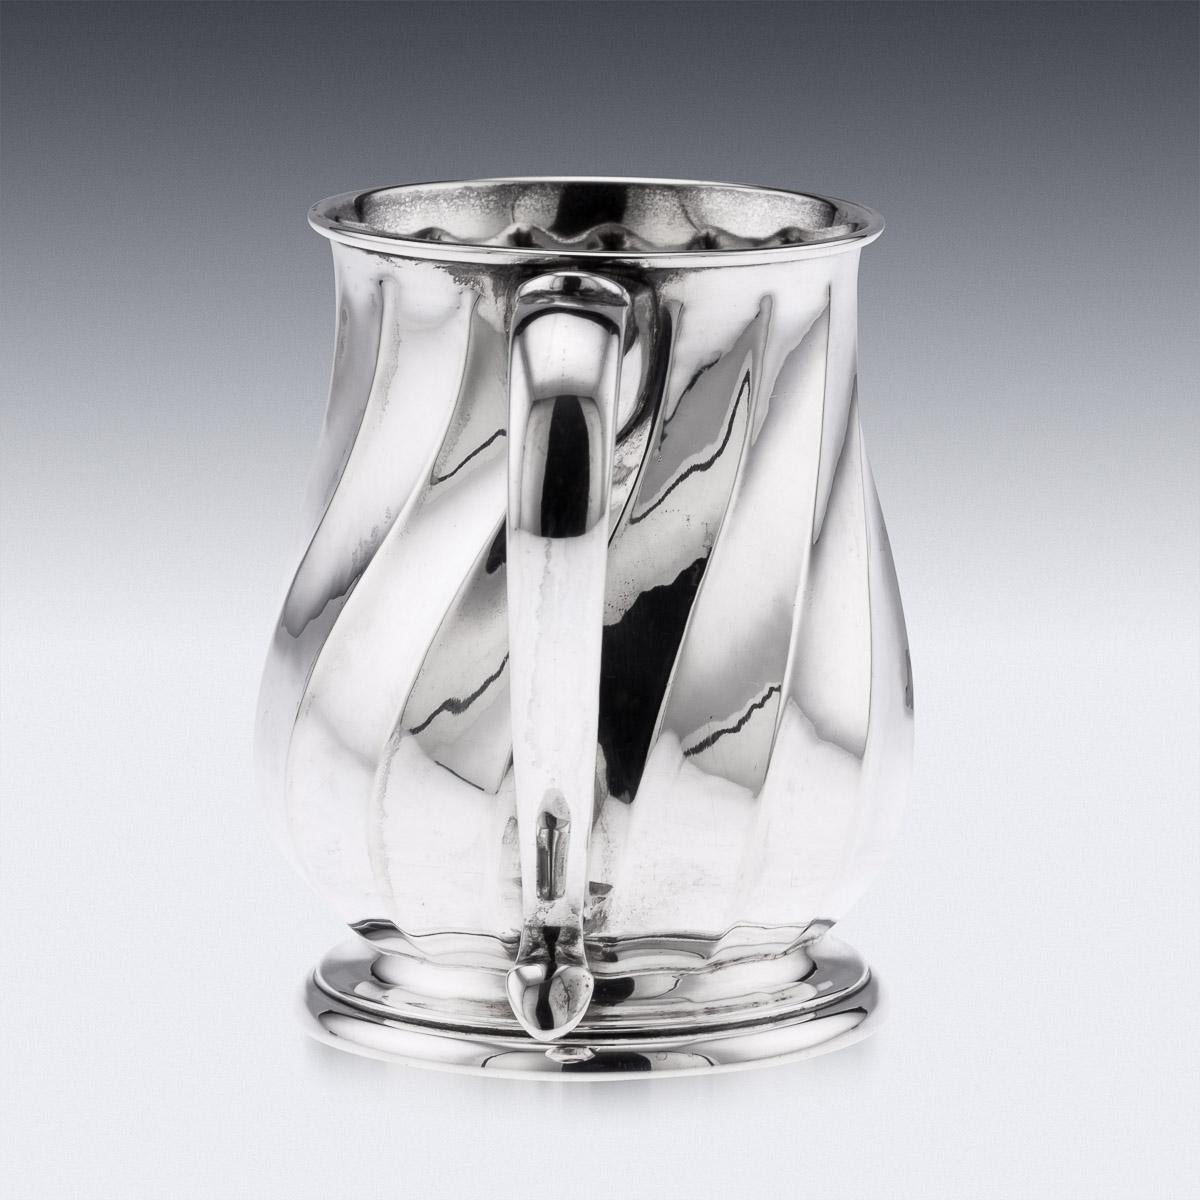 Stylish mid-20th century Italian solid silver mug, of traditional size, baluster form, the body decorated with a twisted fluted decoration and mounted with a c-shaped handle. Hallmarked (800 silver standard), city of Padova (PD).

CONDITION
In